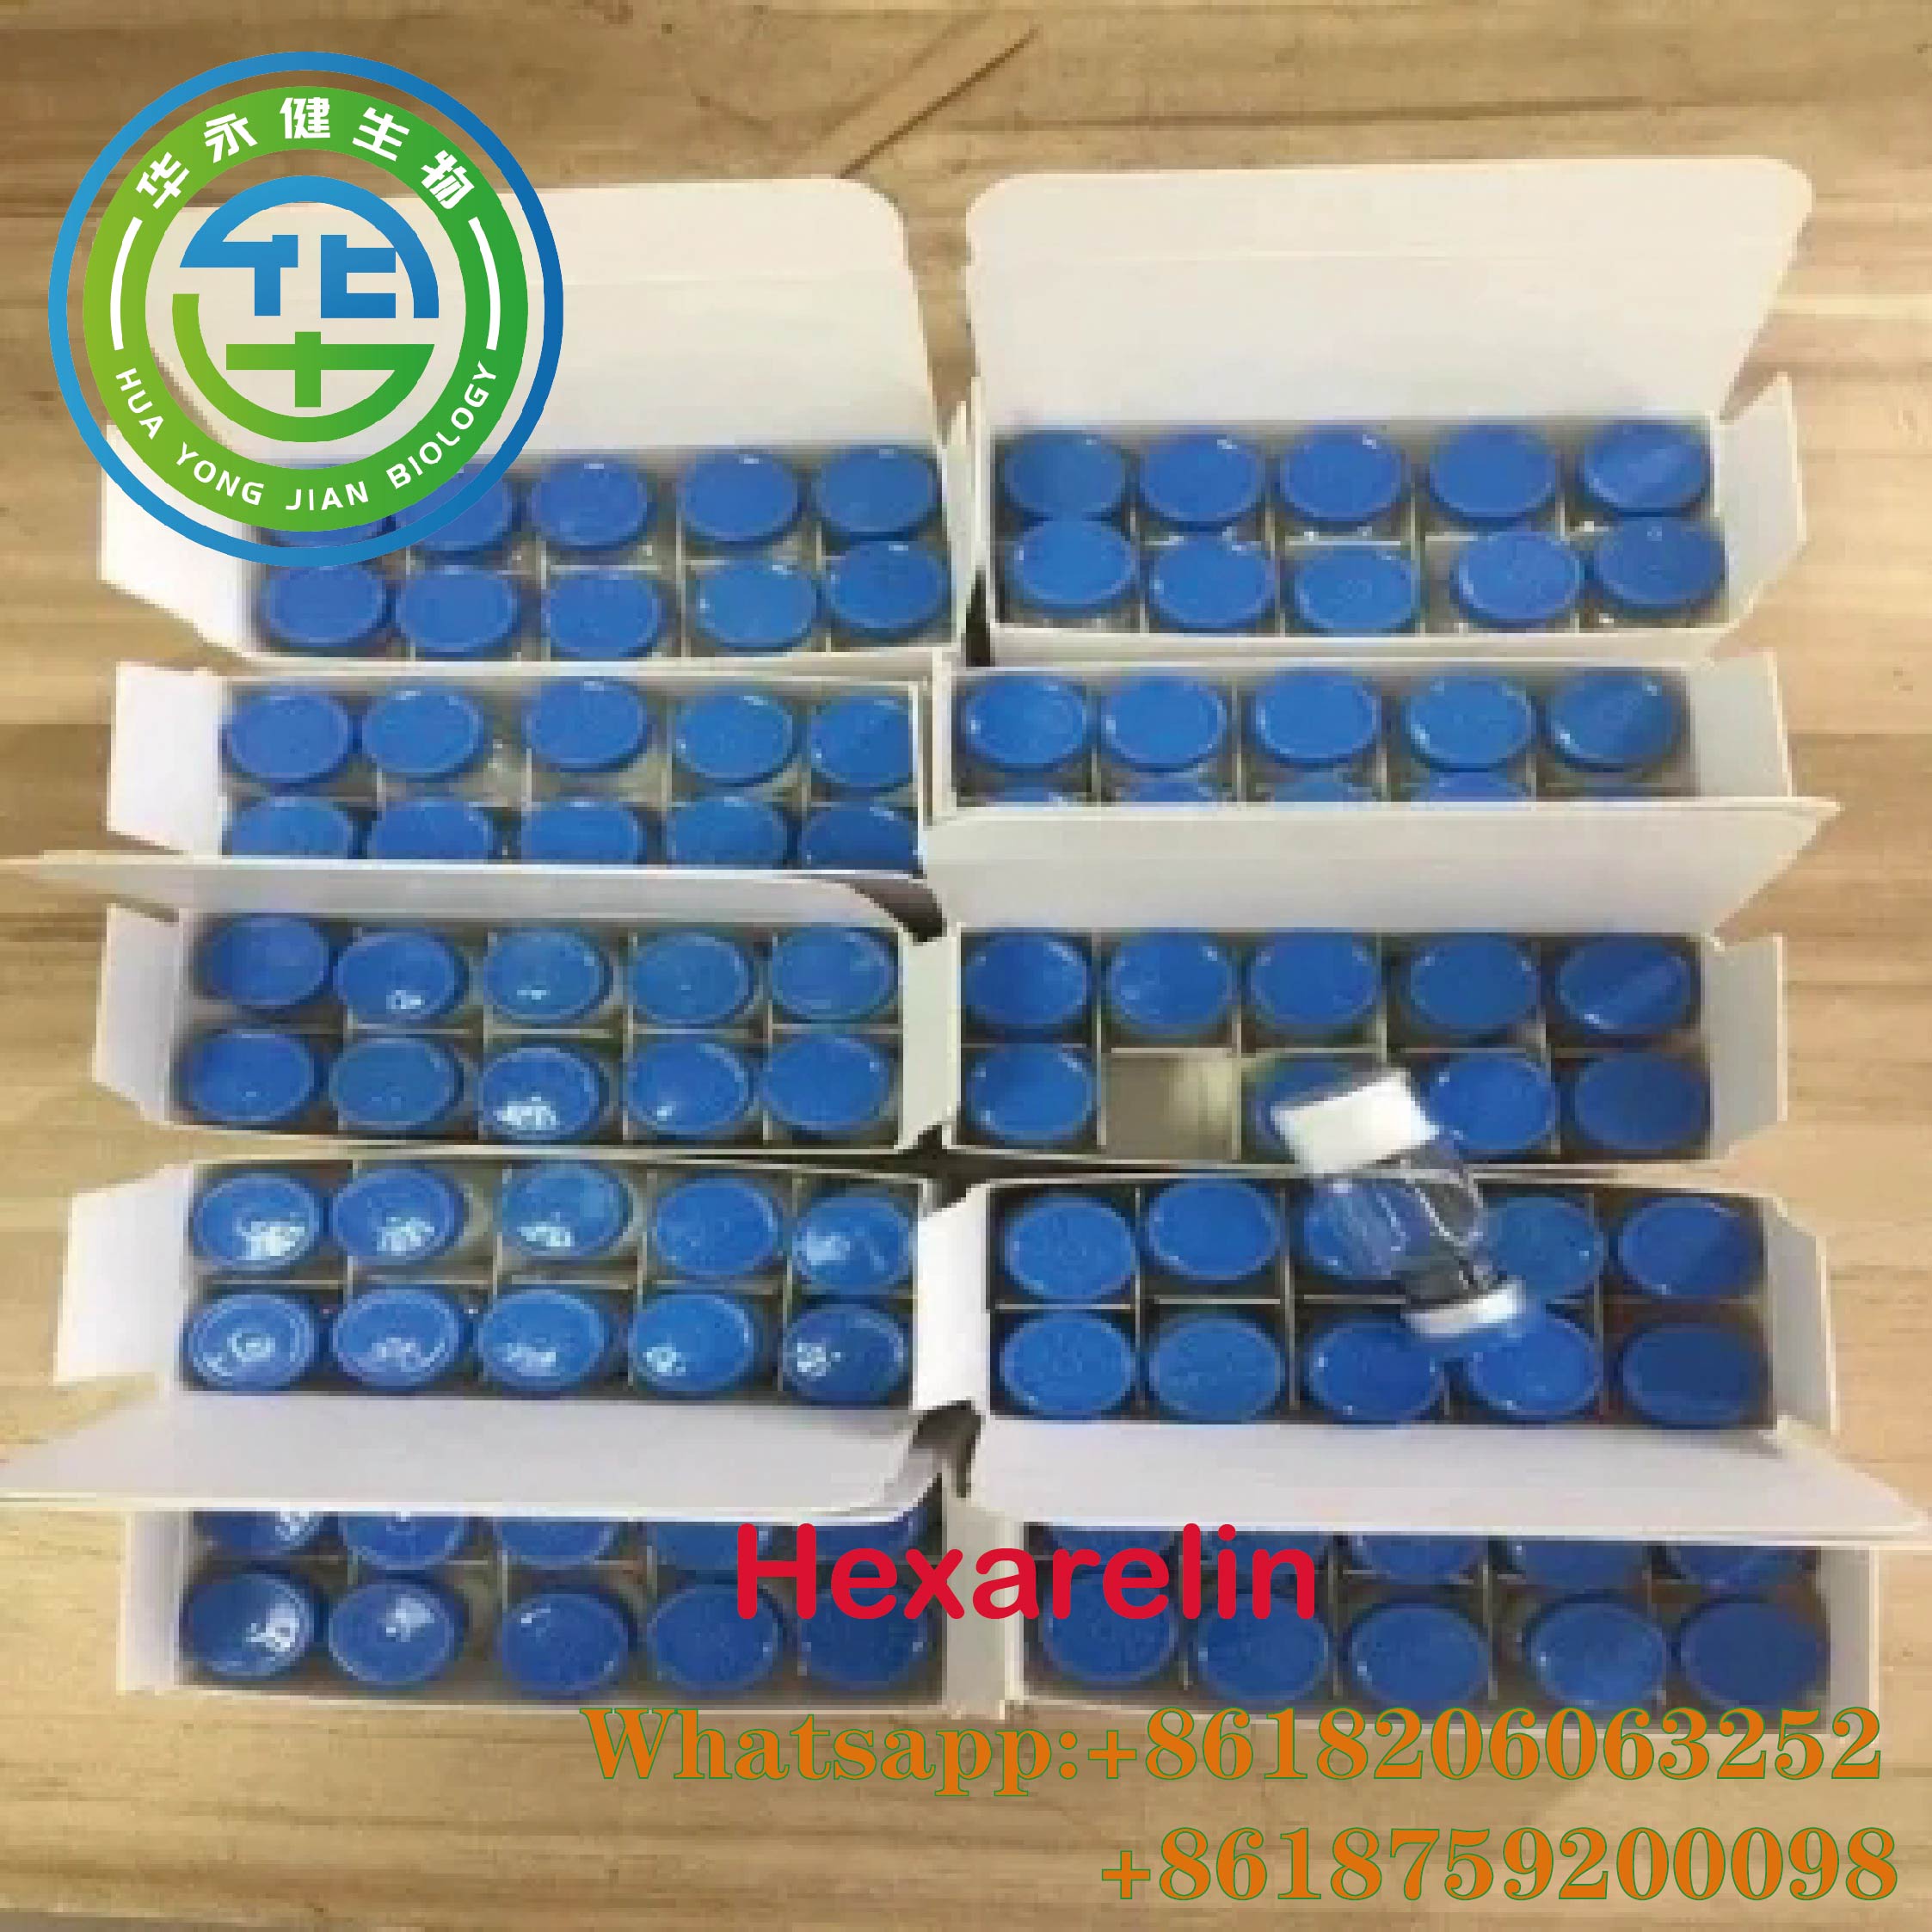 HPLC Hexarelin Muscle Building Peptides Most Effective 98 Percent Purity CasNO.140703-51-1